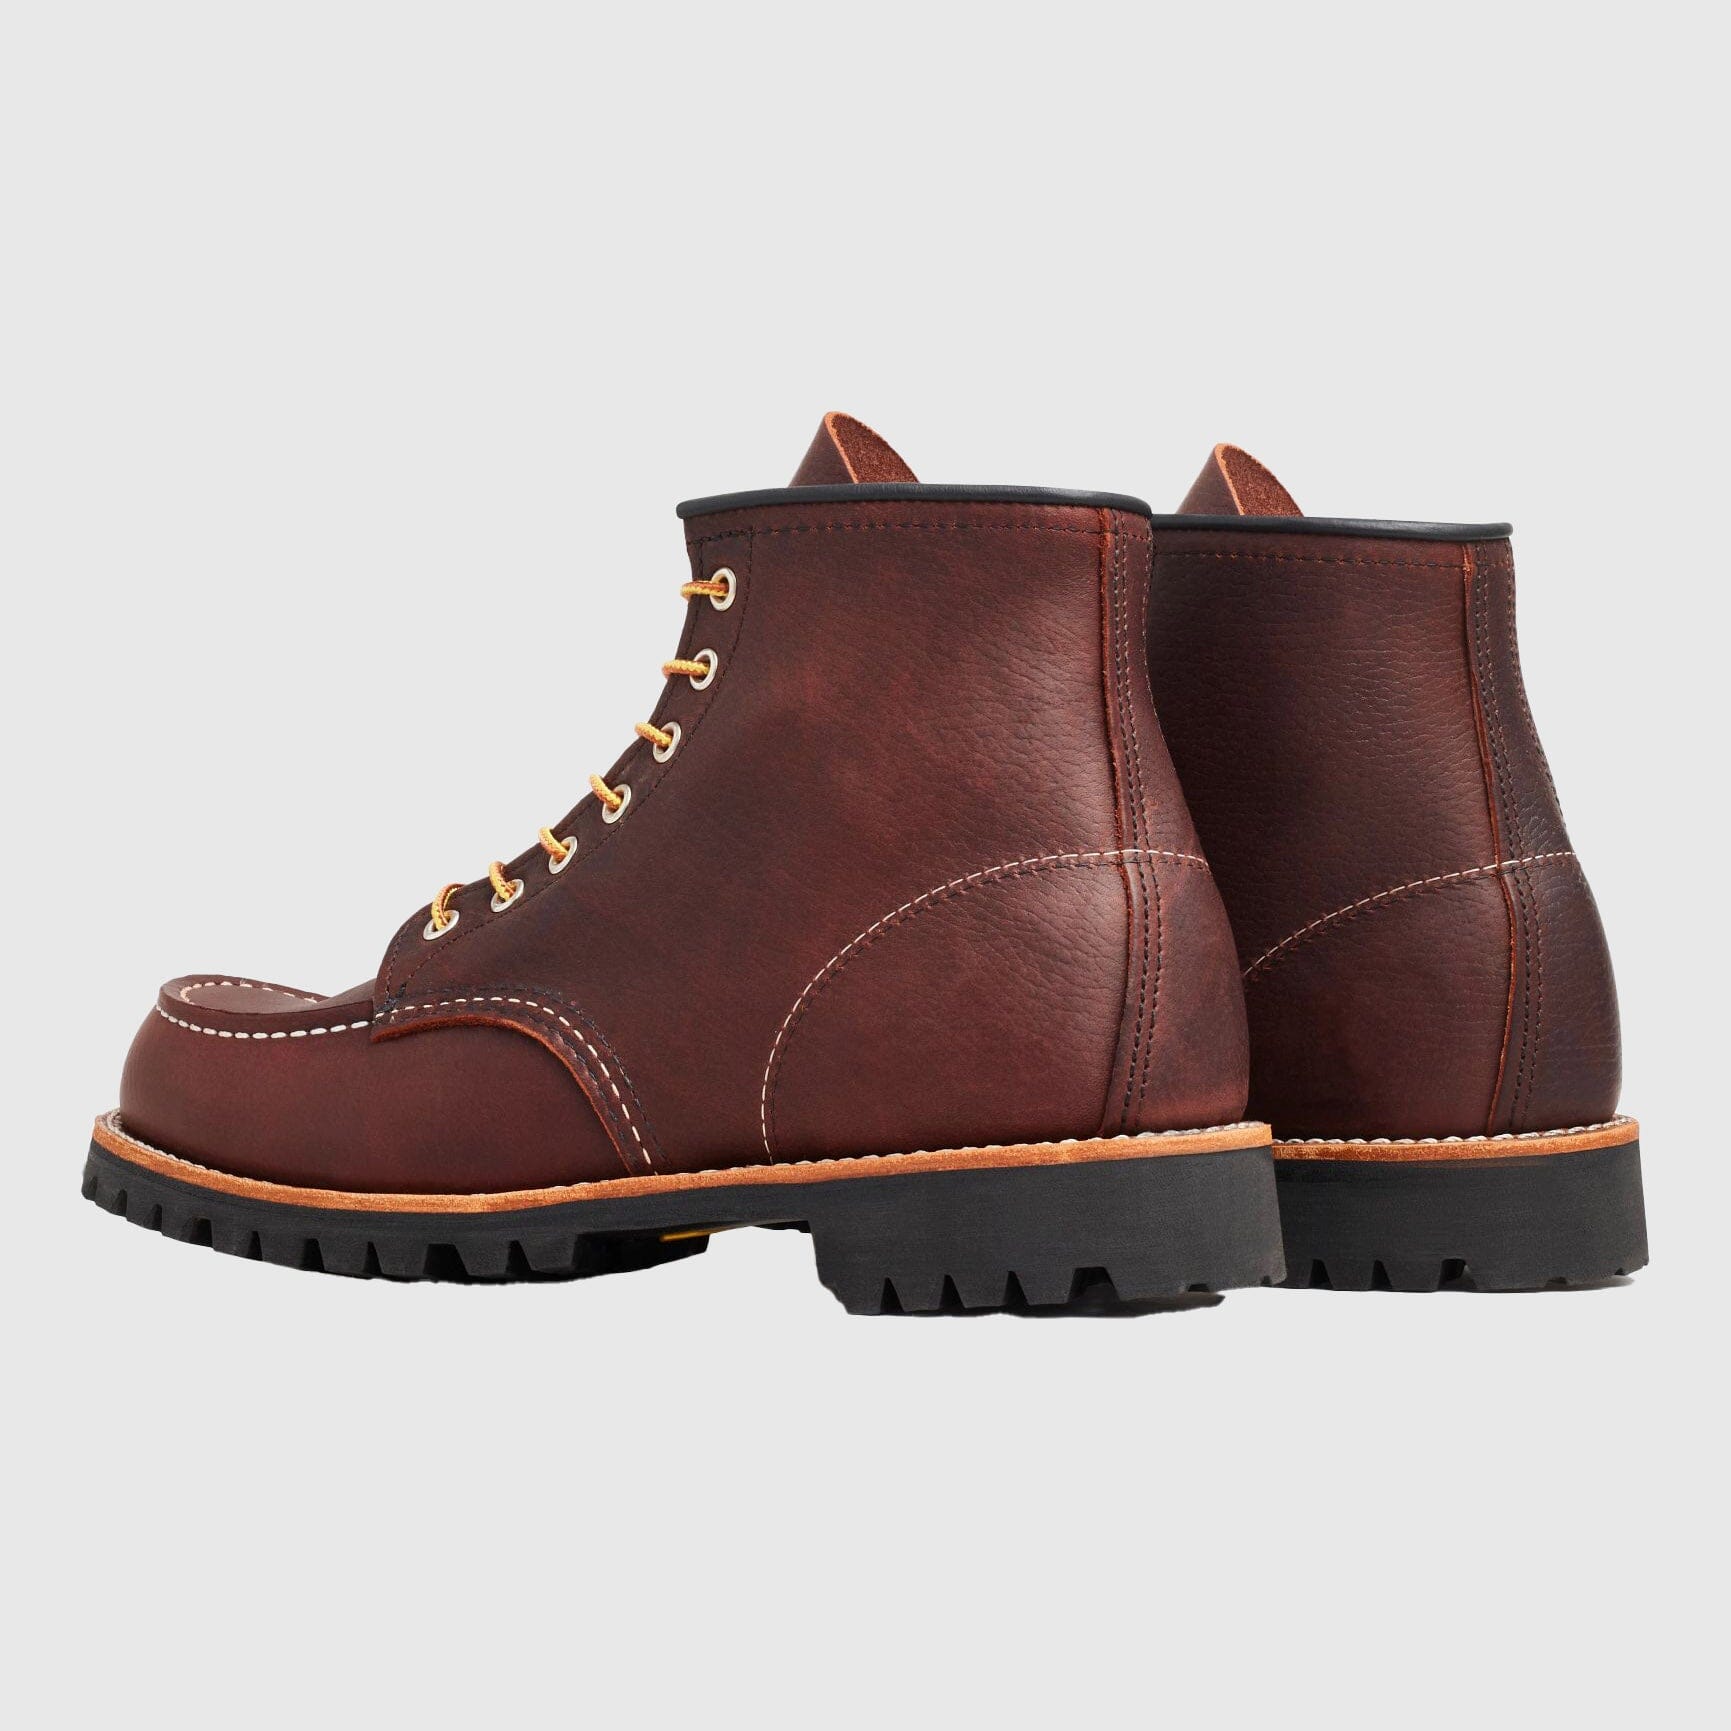 Red Wing Roughneck Moc Toe Boots - Briar Oil Slick Boots Red Wing 